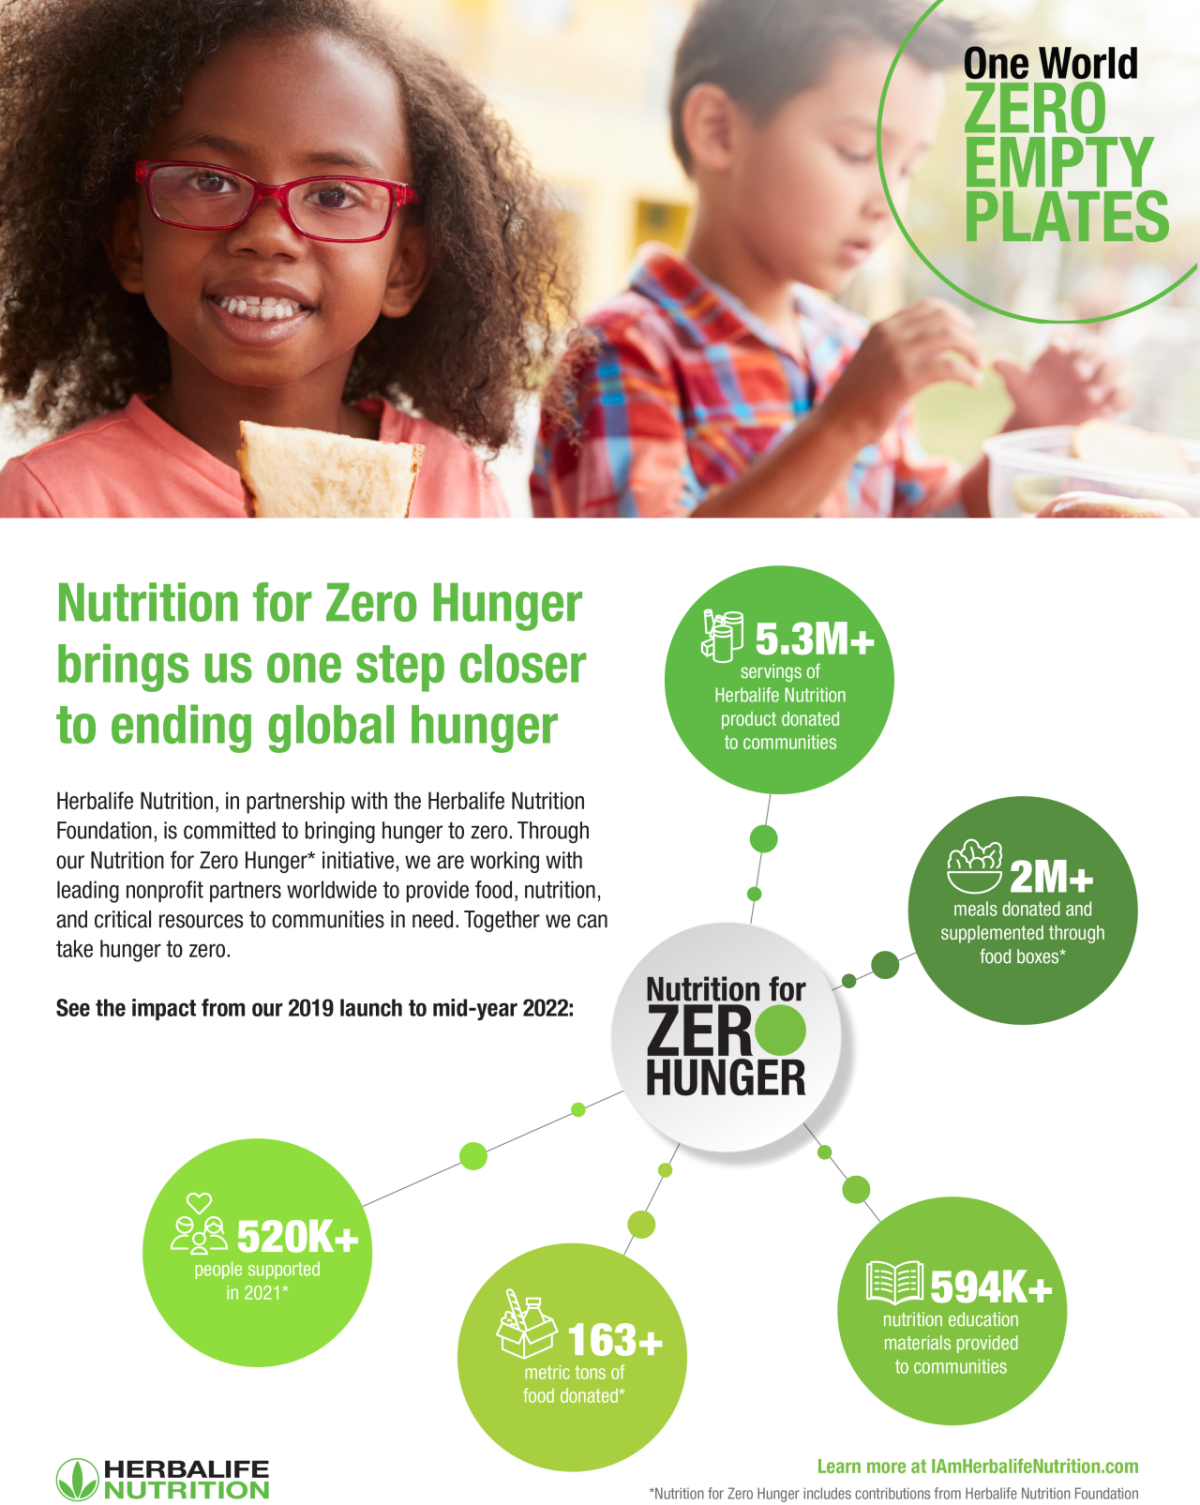 "Nutrition for Zero Hunger brings us one step closer to ending global hunger Herbalife Nutrition, in partnership with the Herbalife Nutrition Foundation, is committed to bringing hunger to zero. Through our Nutrition for Zero Hunger* initiative, we are working with leading nonprofit partners worldwide to provide food, nutrition, and critical resources to communities in need. Together we can take hunger to zero." Infographic